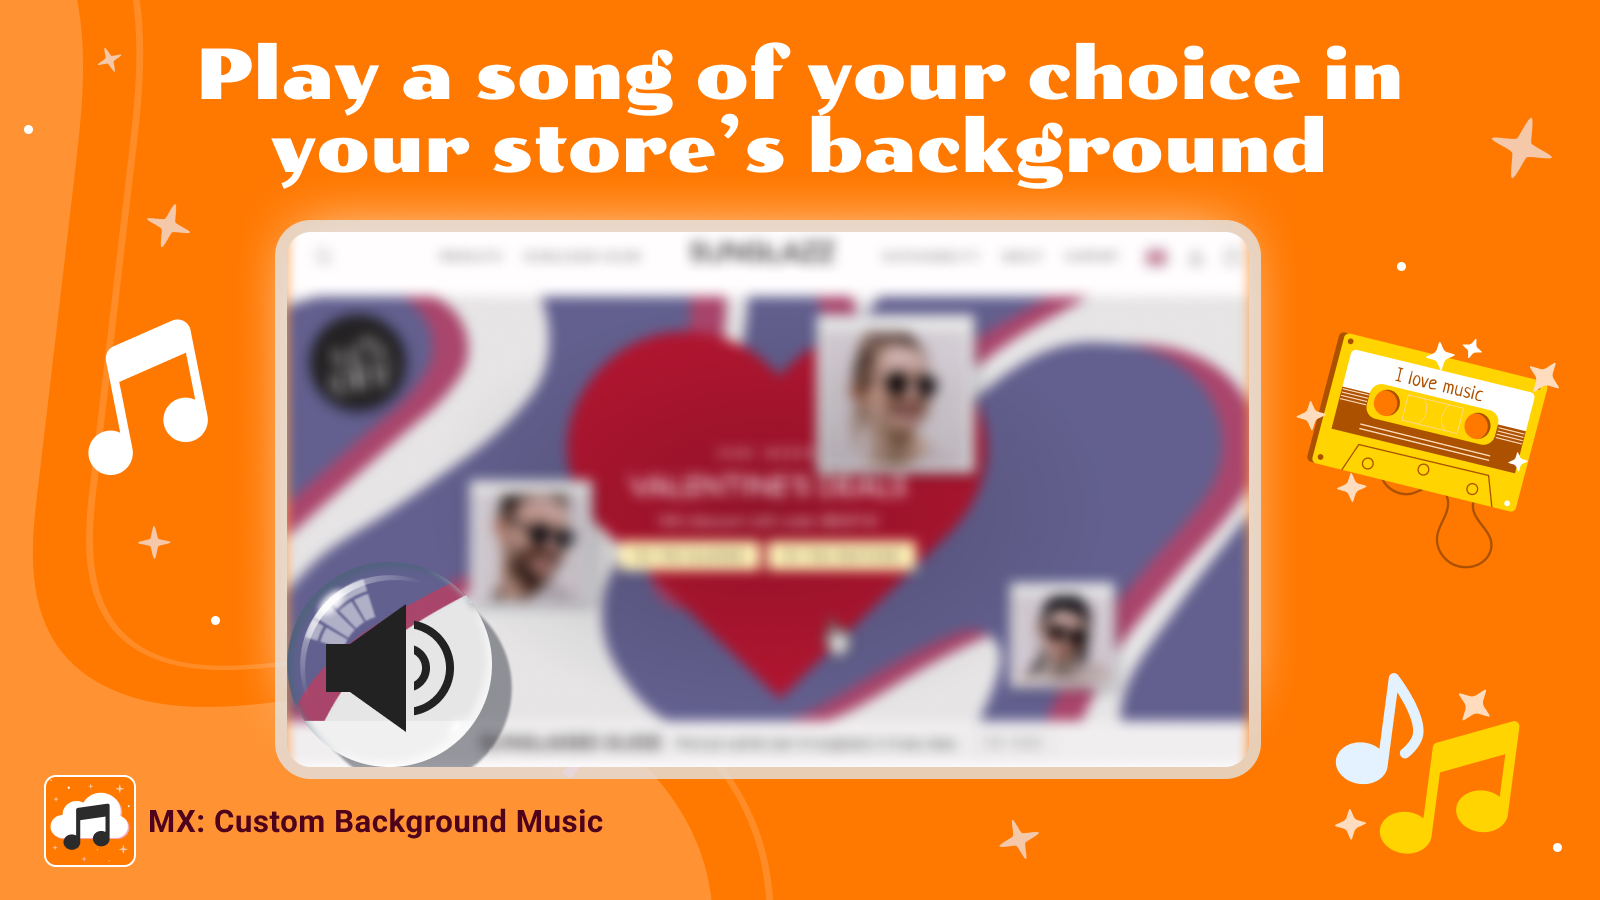 Play your own music/audio/song in the background of your store!